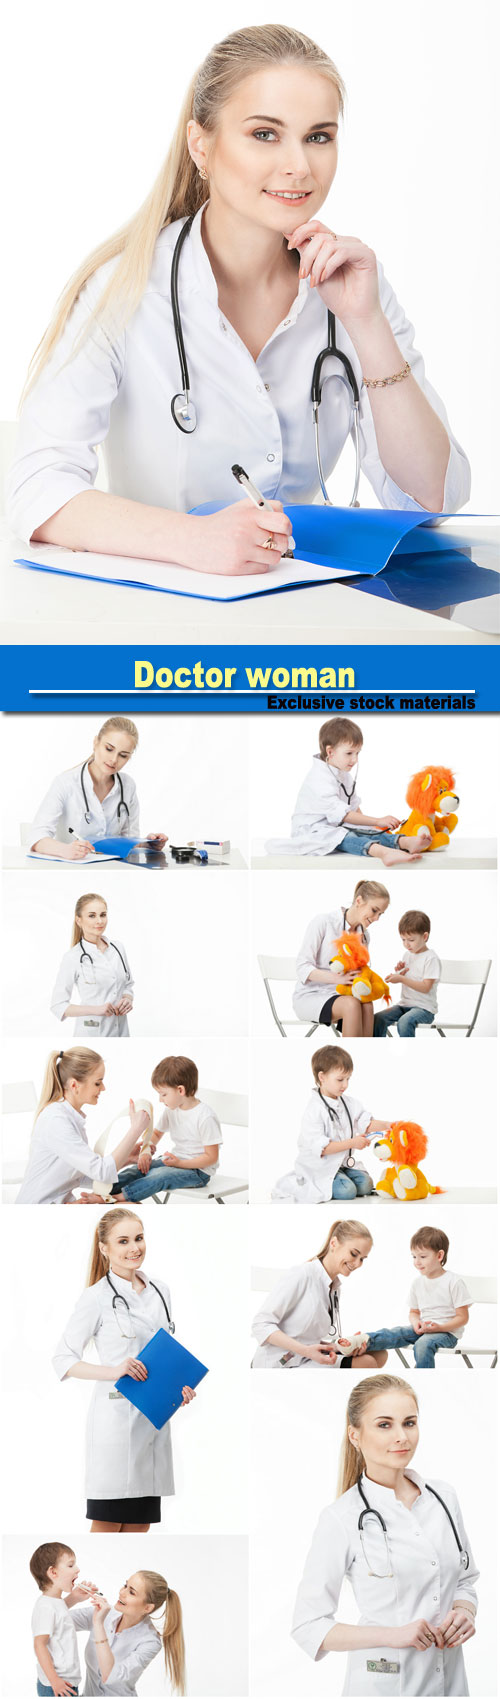 Doctor woman and child patient